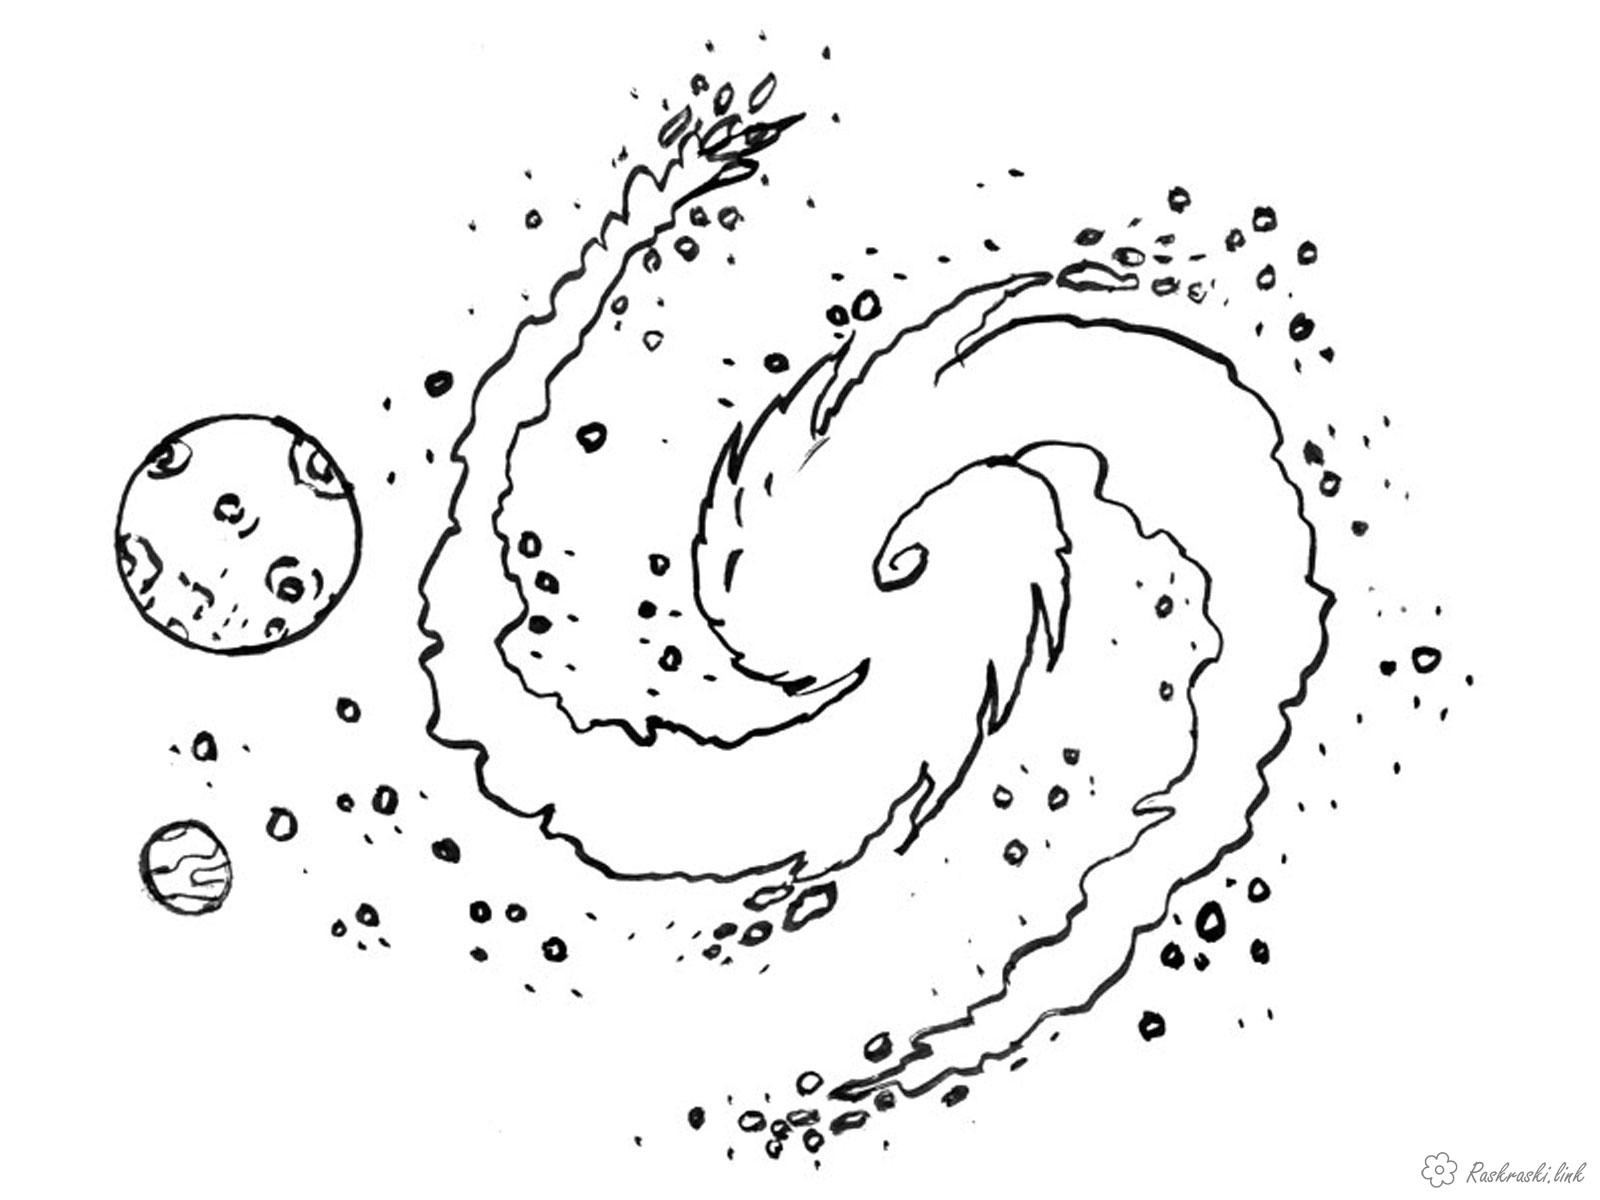 Galaxy Coloring Pages
 Milky Way Galaxy Coloring Page Coloring Pages